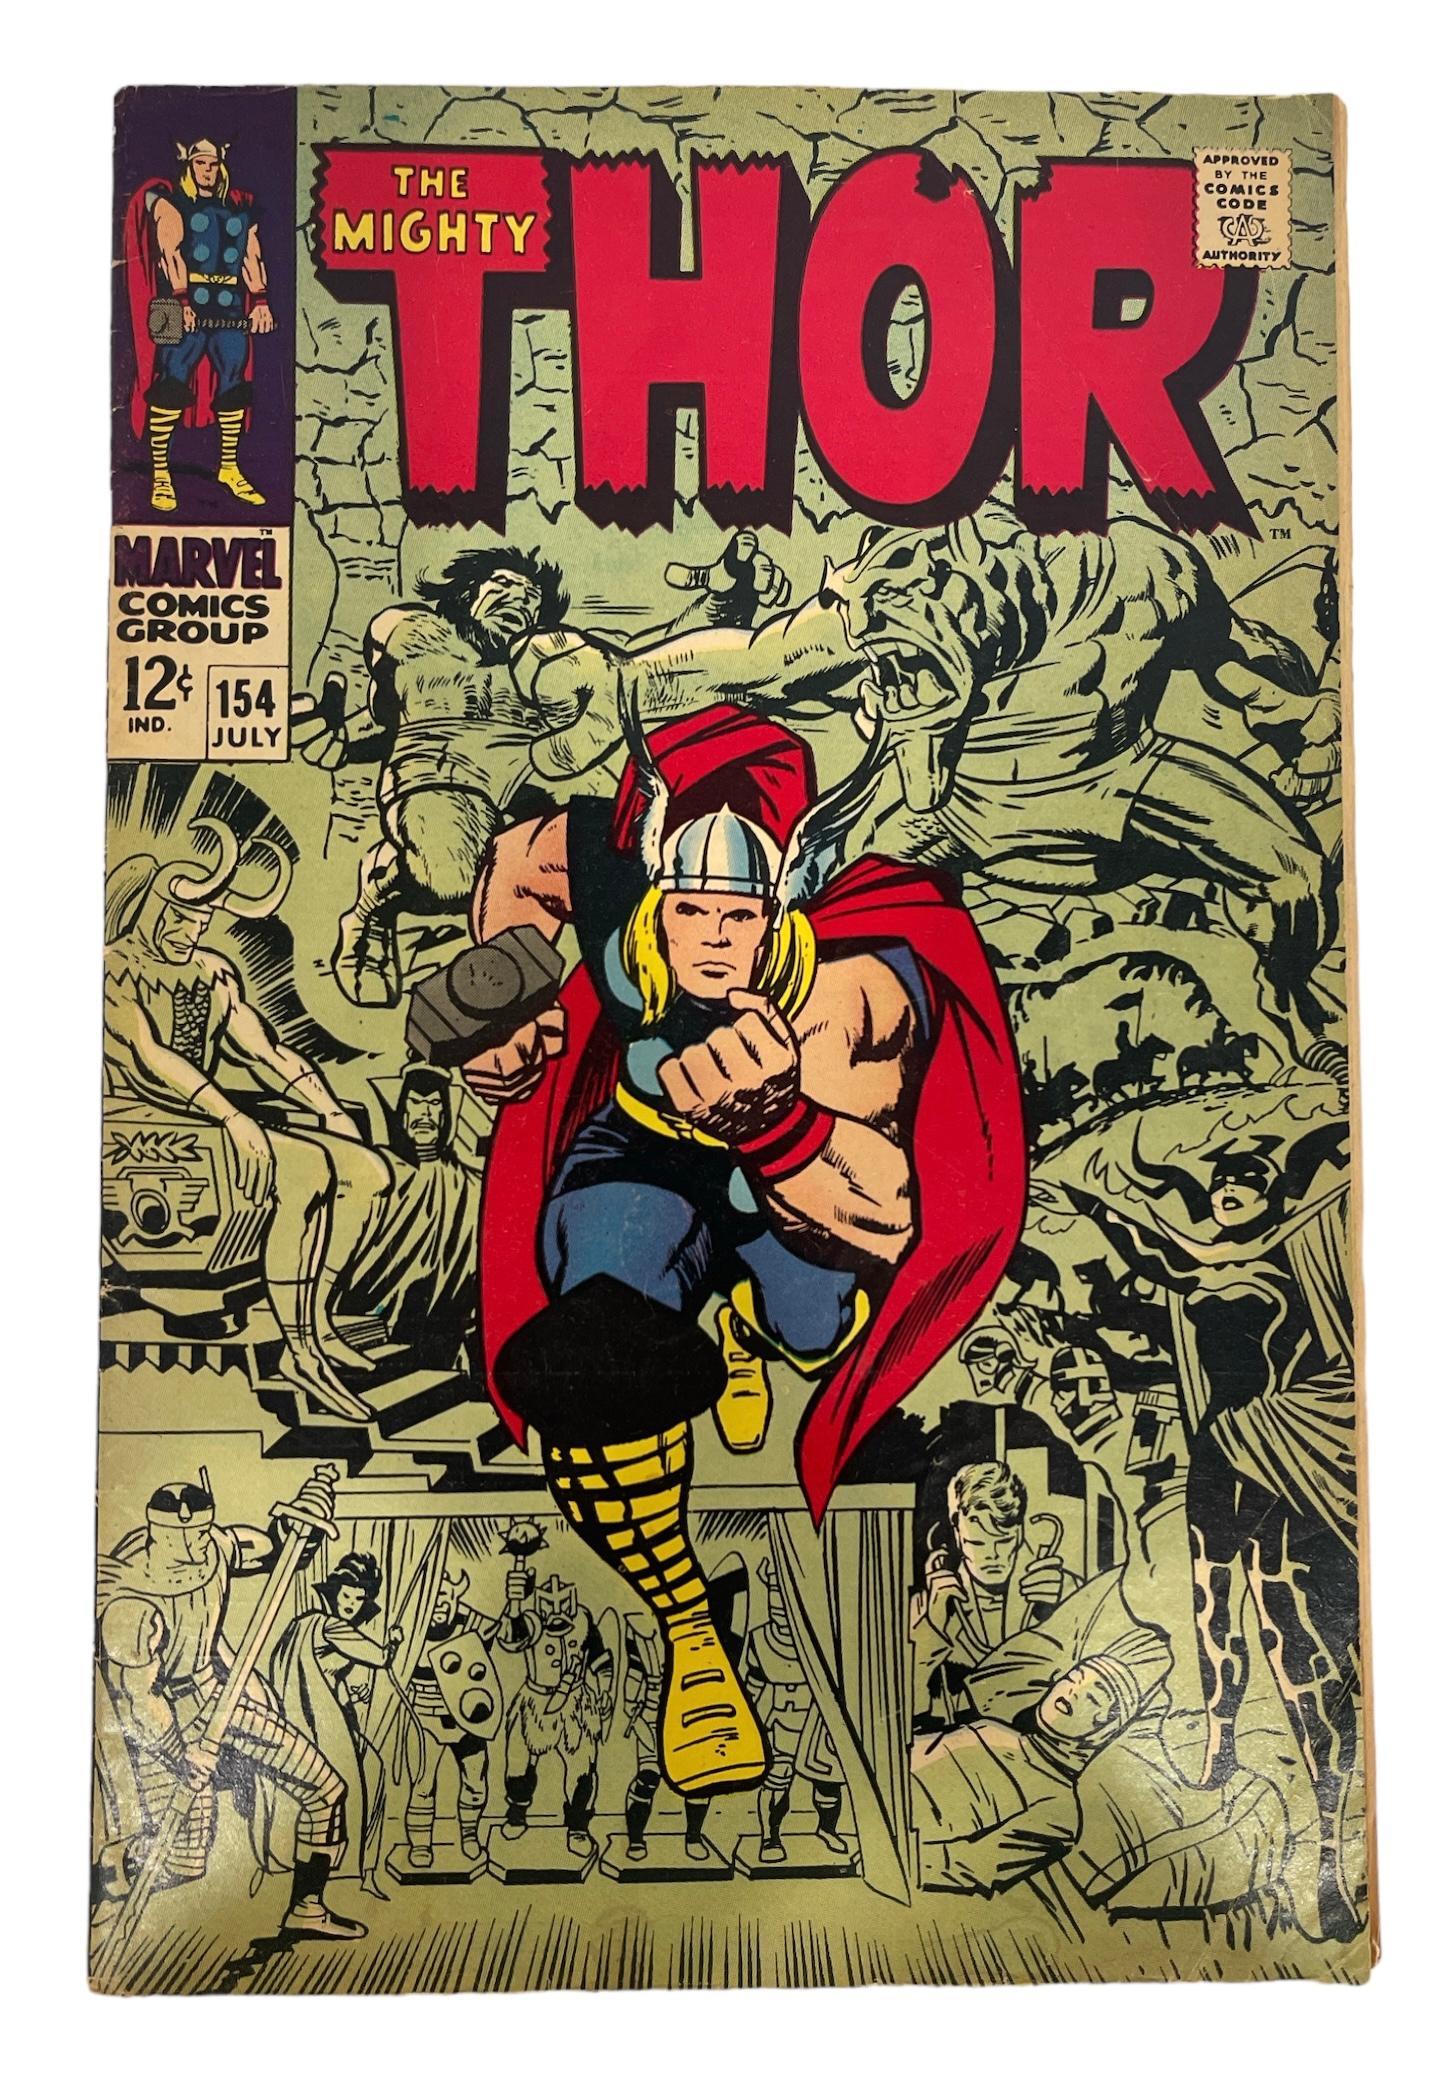 Vintage Marvel Comics - The Mighty Thor No.154 and No.133